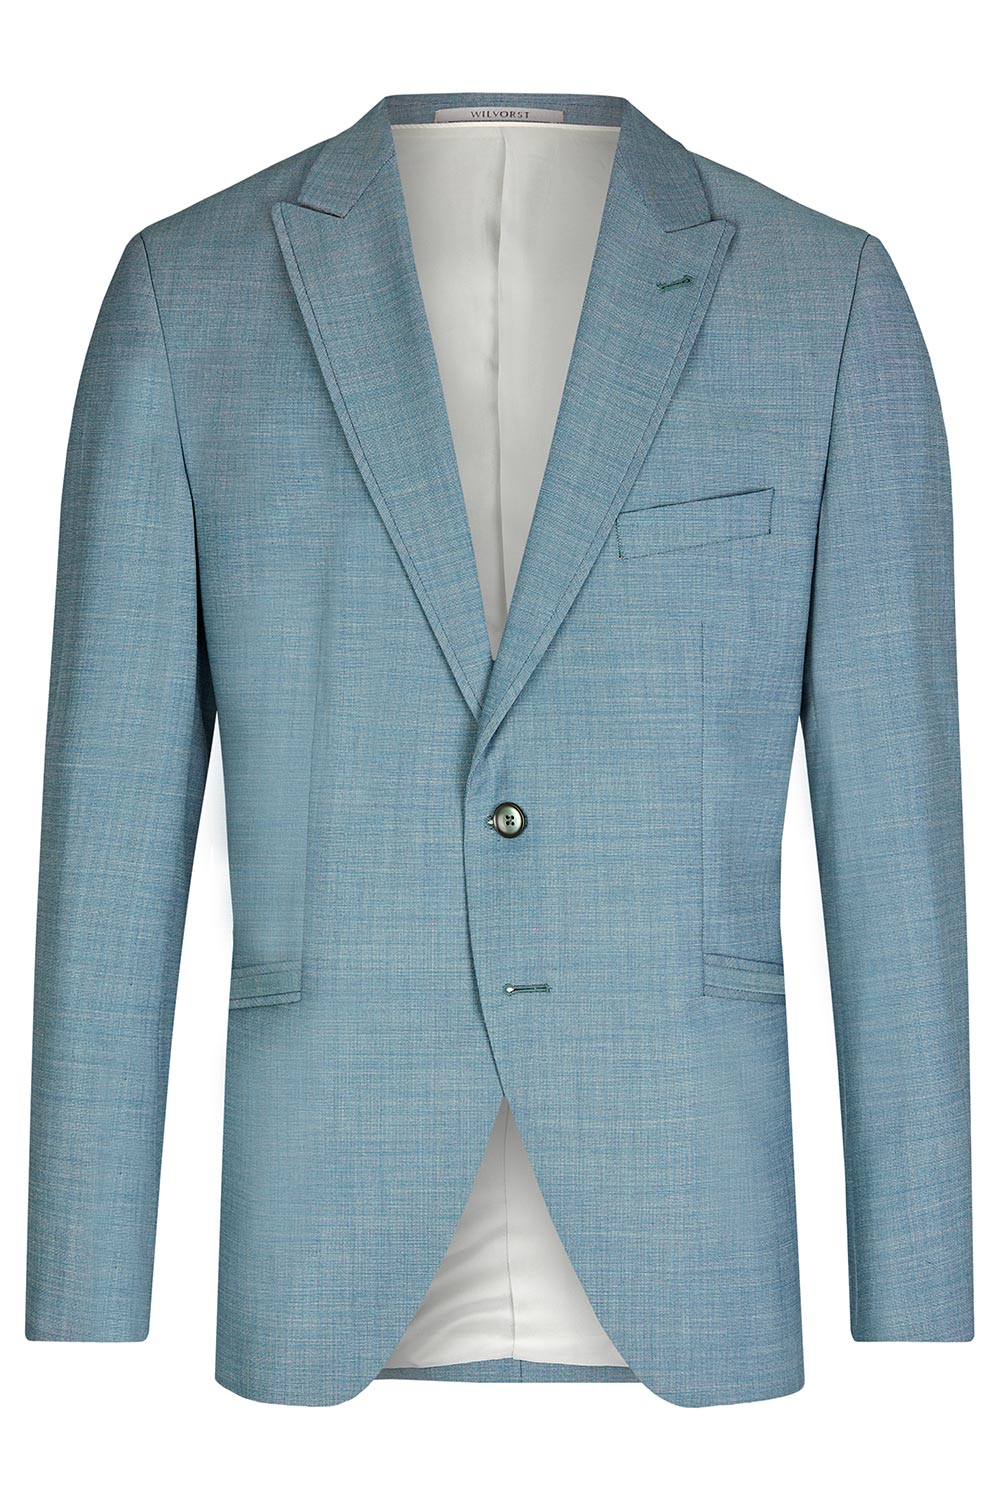 Green Blue 3 piece Wedding Suit - Tom Murphy's Formal and Menswear